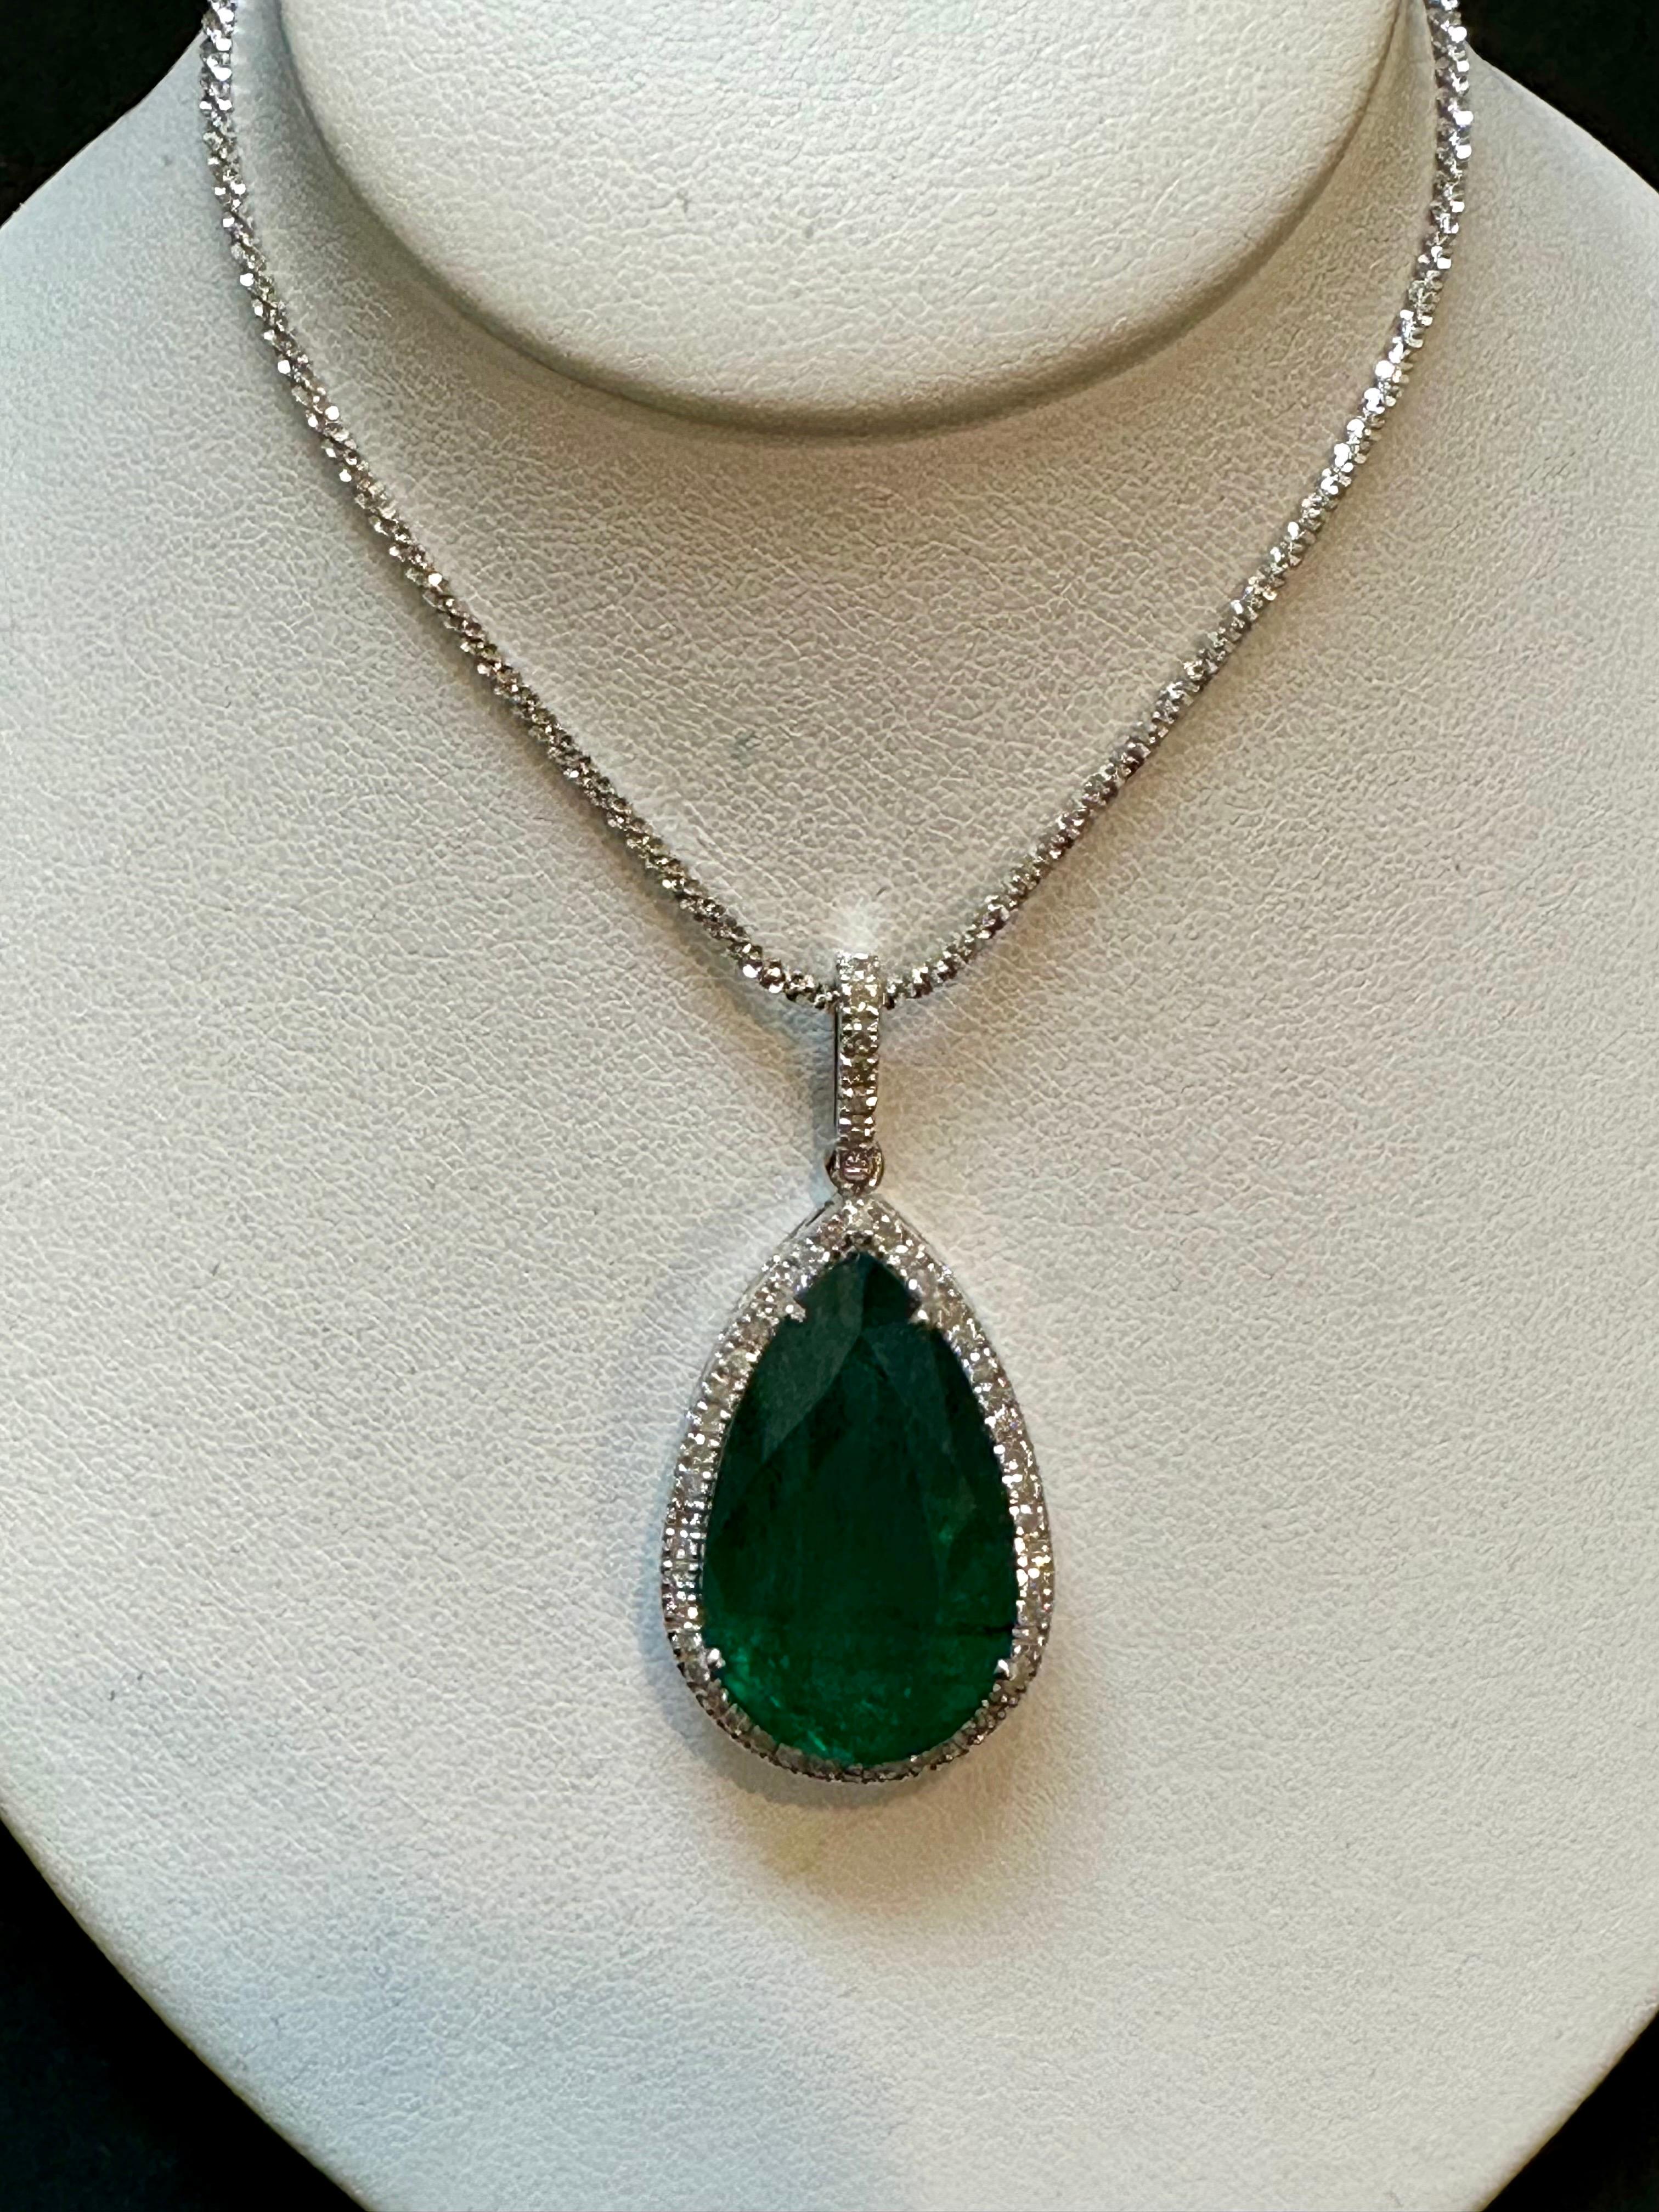 19 Ct Pear Cut Emerald & 1 Ct Diamond Halo Pendent/Necklace 14 KW Gold Chain For Sale 2